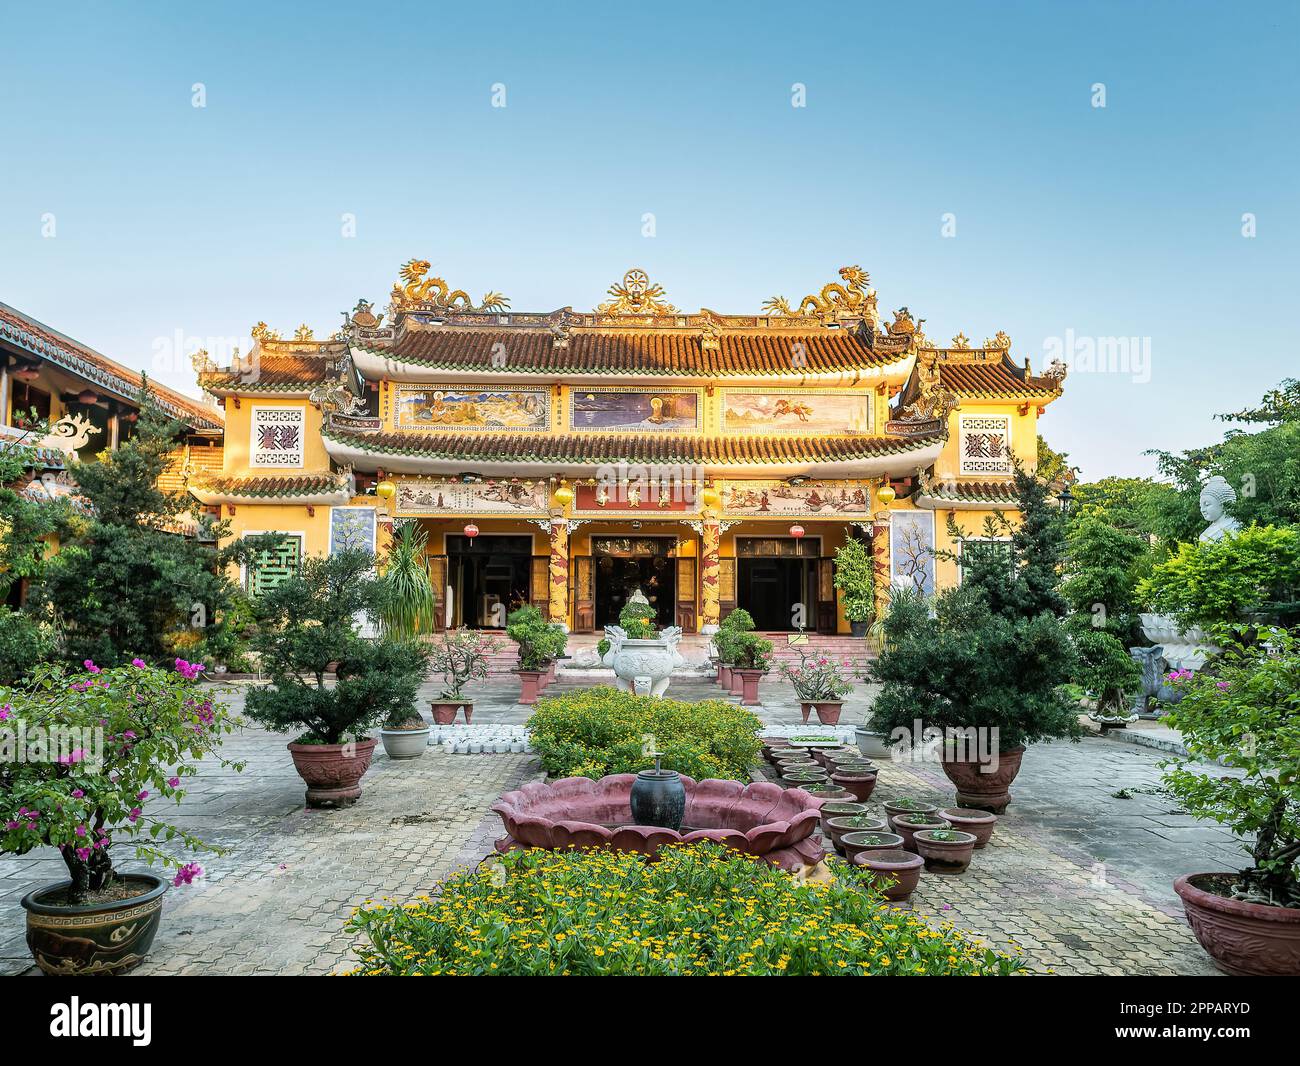 The Phap Bao Temple in Hoi An, Quang Nam province, Vietnam. The old city of Hoi An is a World Heritage Site, and famous for its well preserved buildin Stock Photo